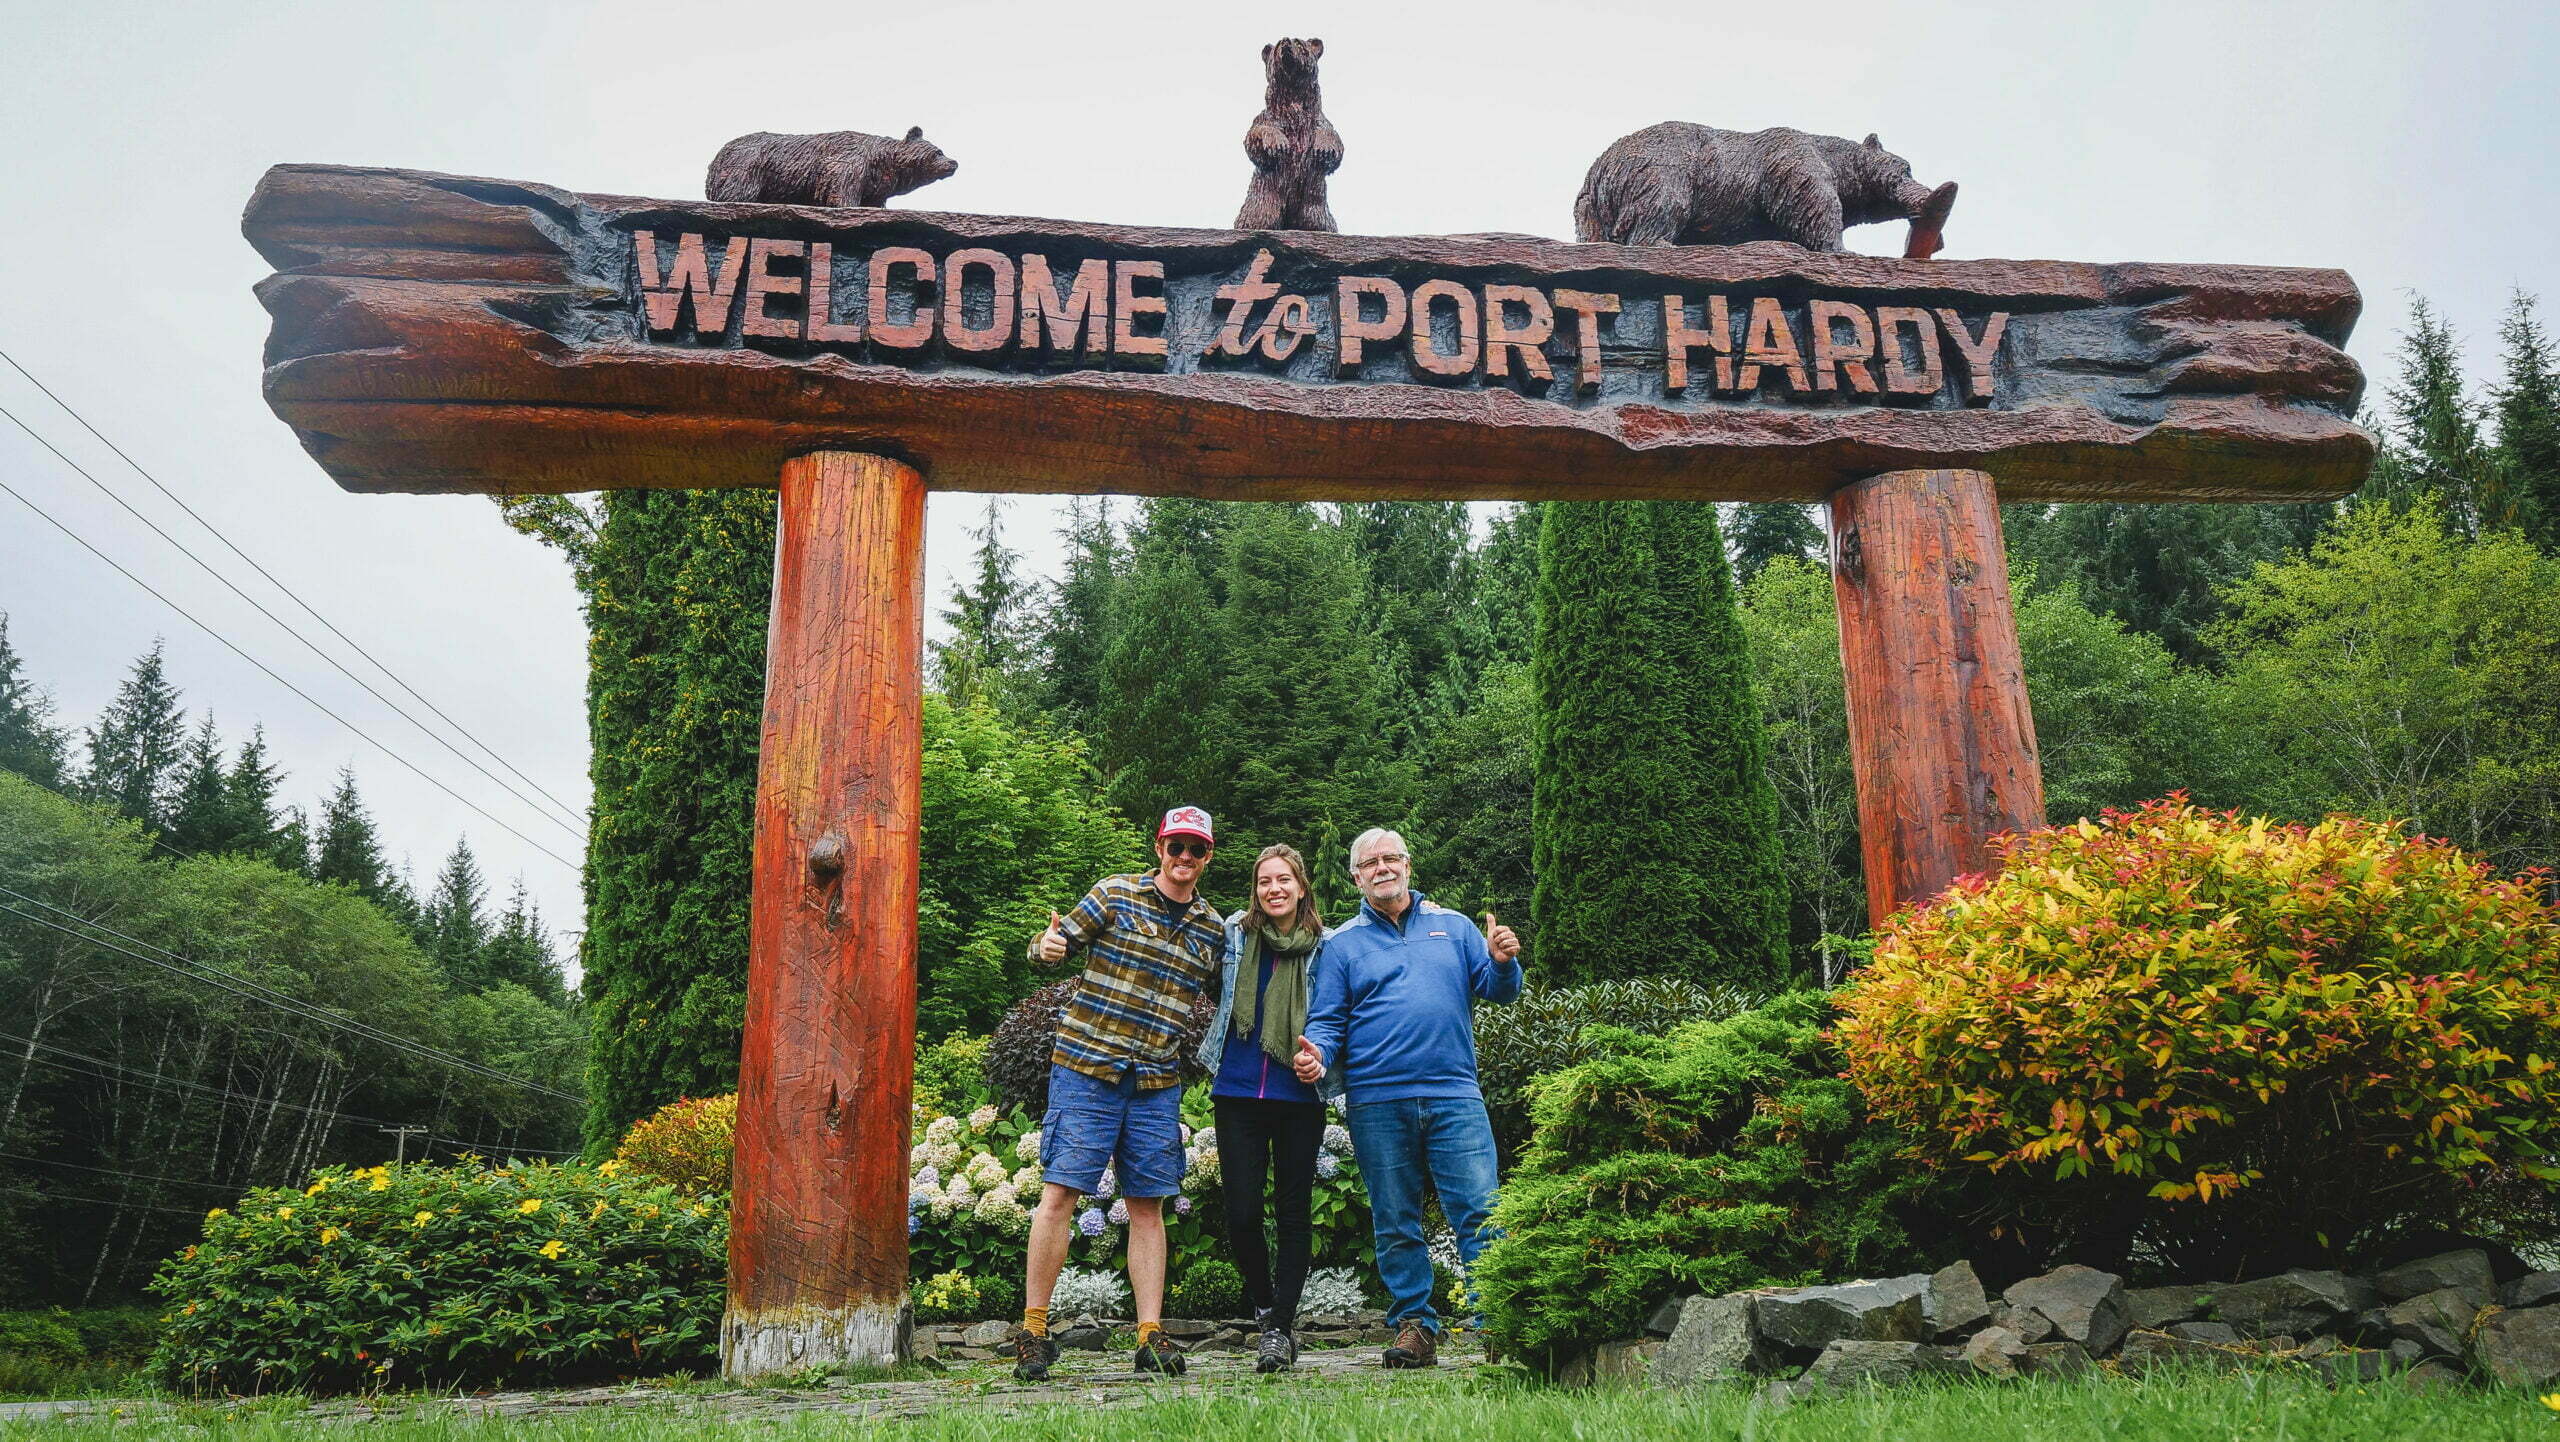 Nomadic Samuel visiting Port Hardy with his wife Audrey and father-in-law on Vancouver Island, British Columbia, Canada